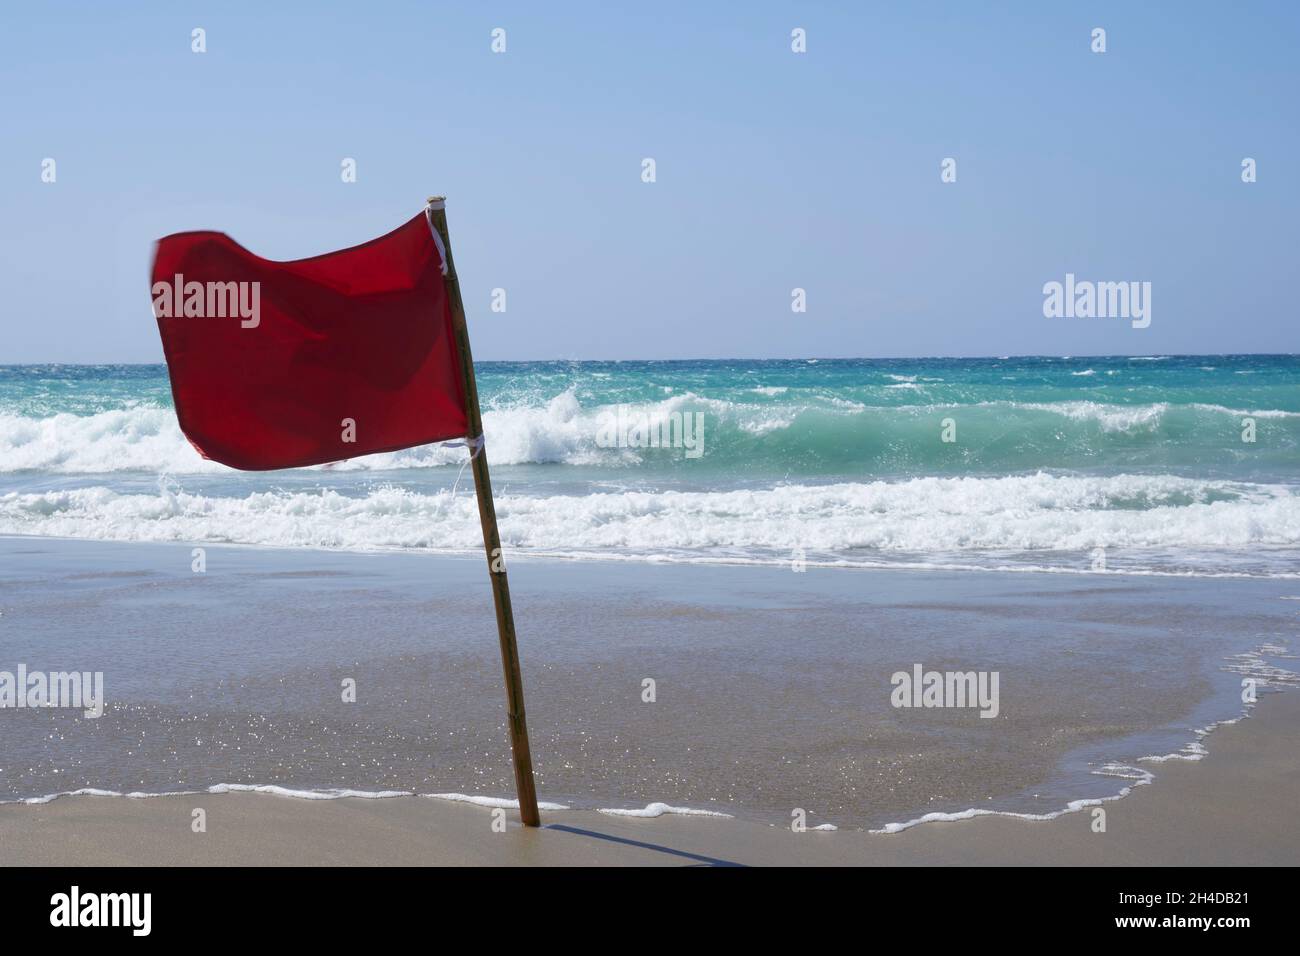 Red warning flag blowing in wind on beach with rough surf in background Stock Photo